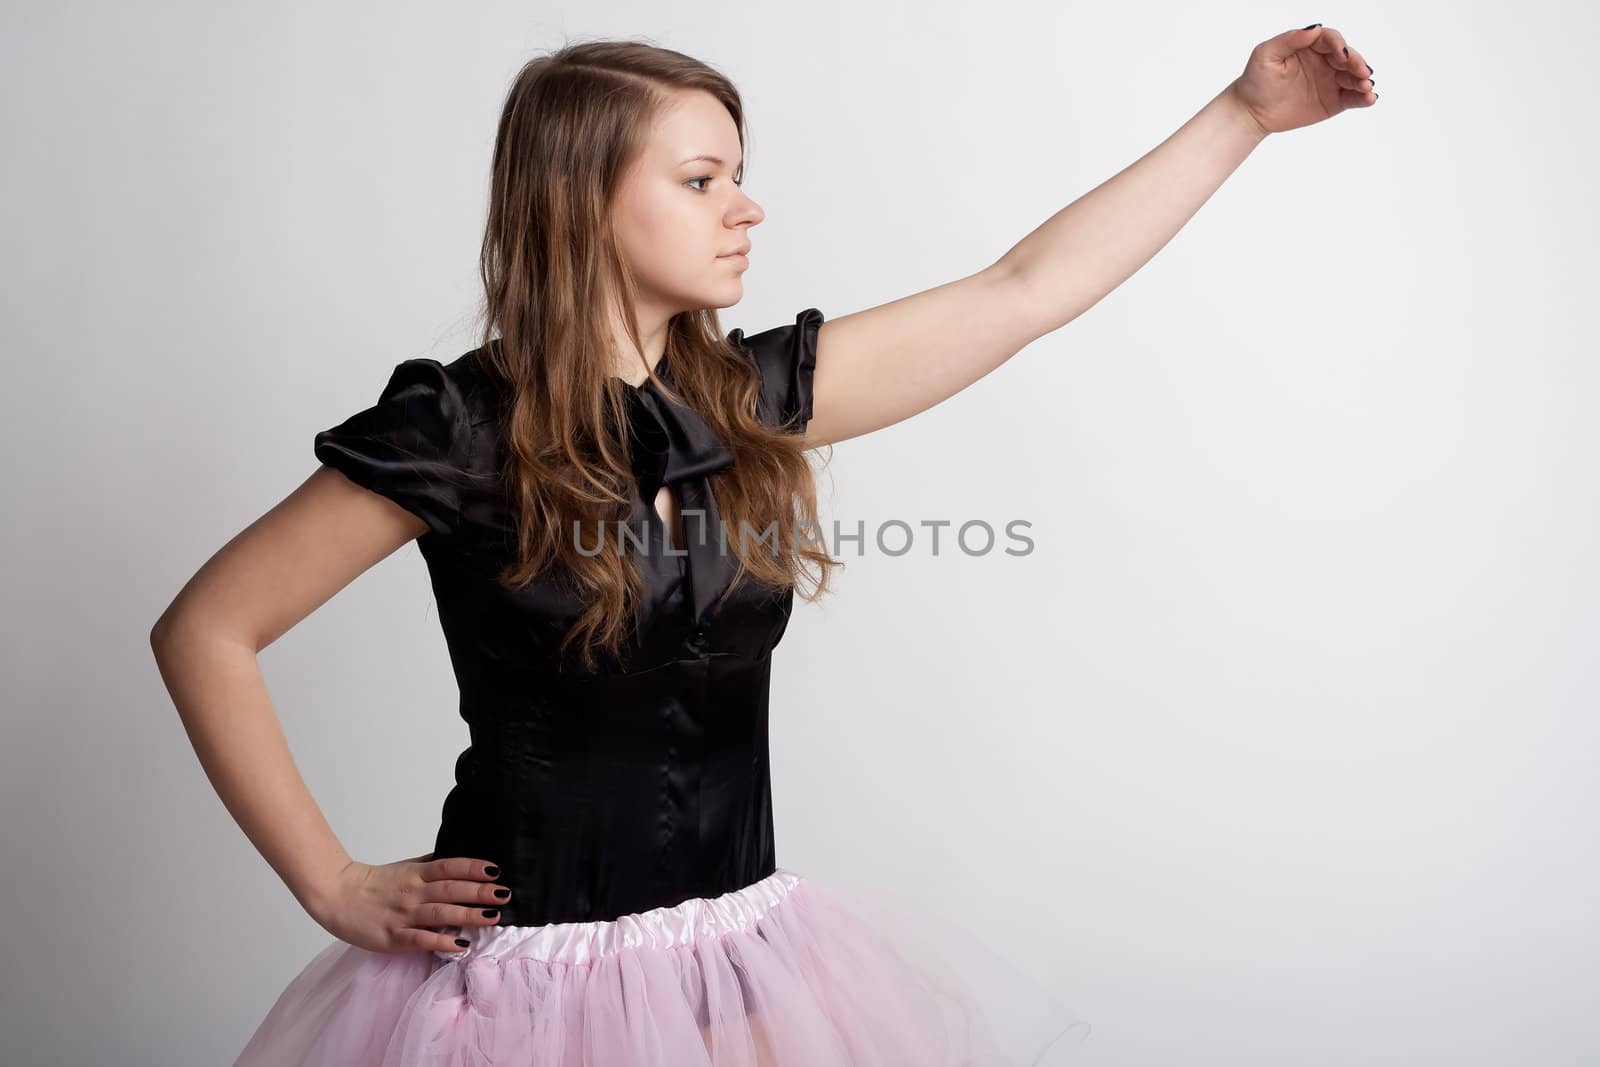 Young girl in a pink skirt on a light background